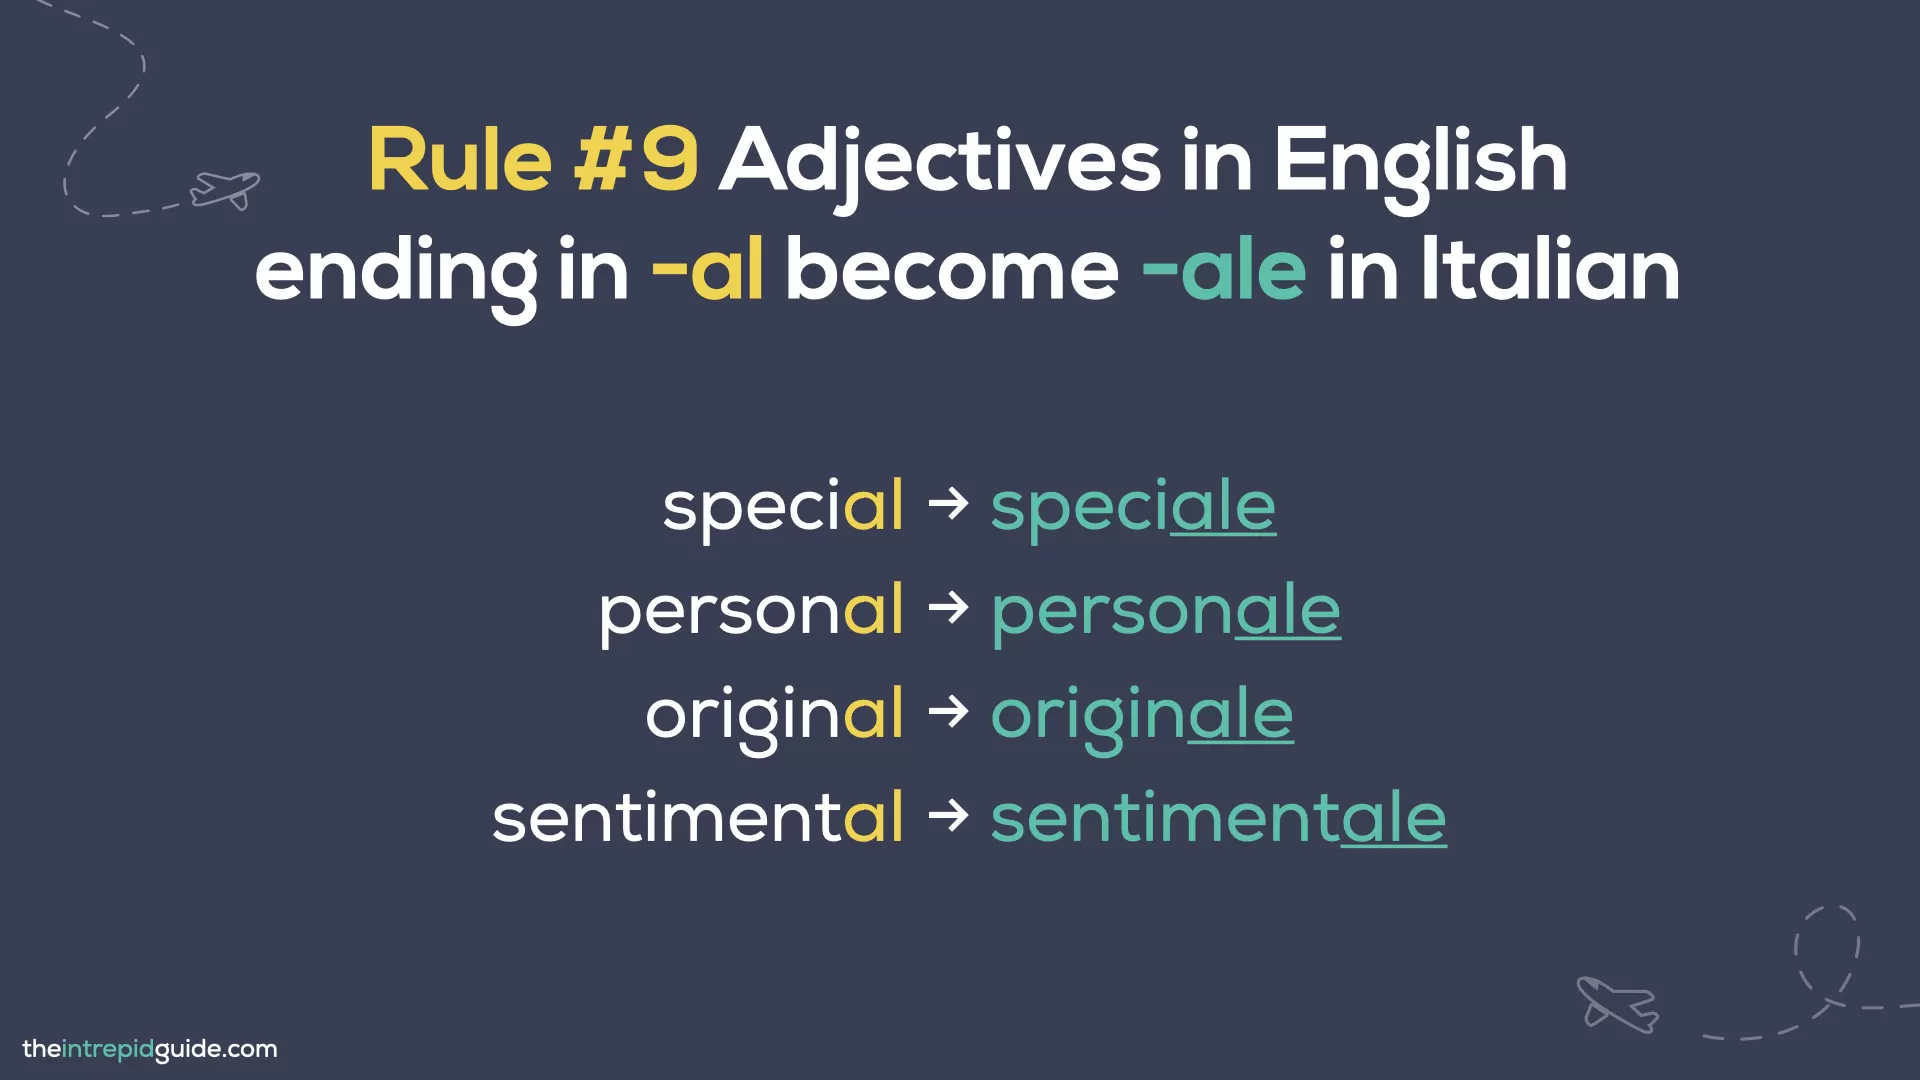 Italian cognates and loan words - Rule 9 - Adjectives in English ending in -al become -ale in Italian